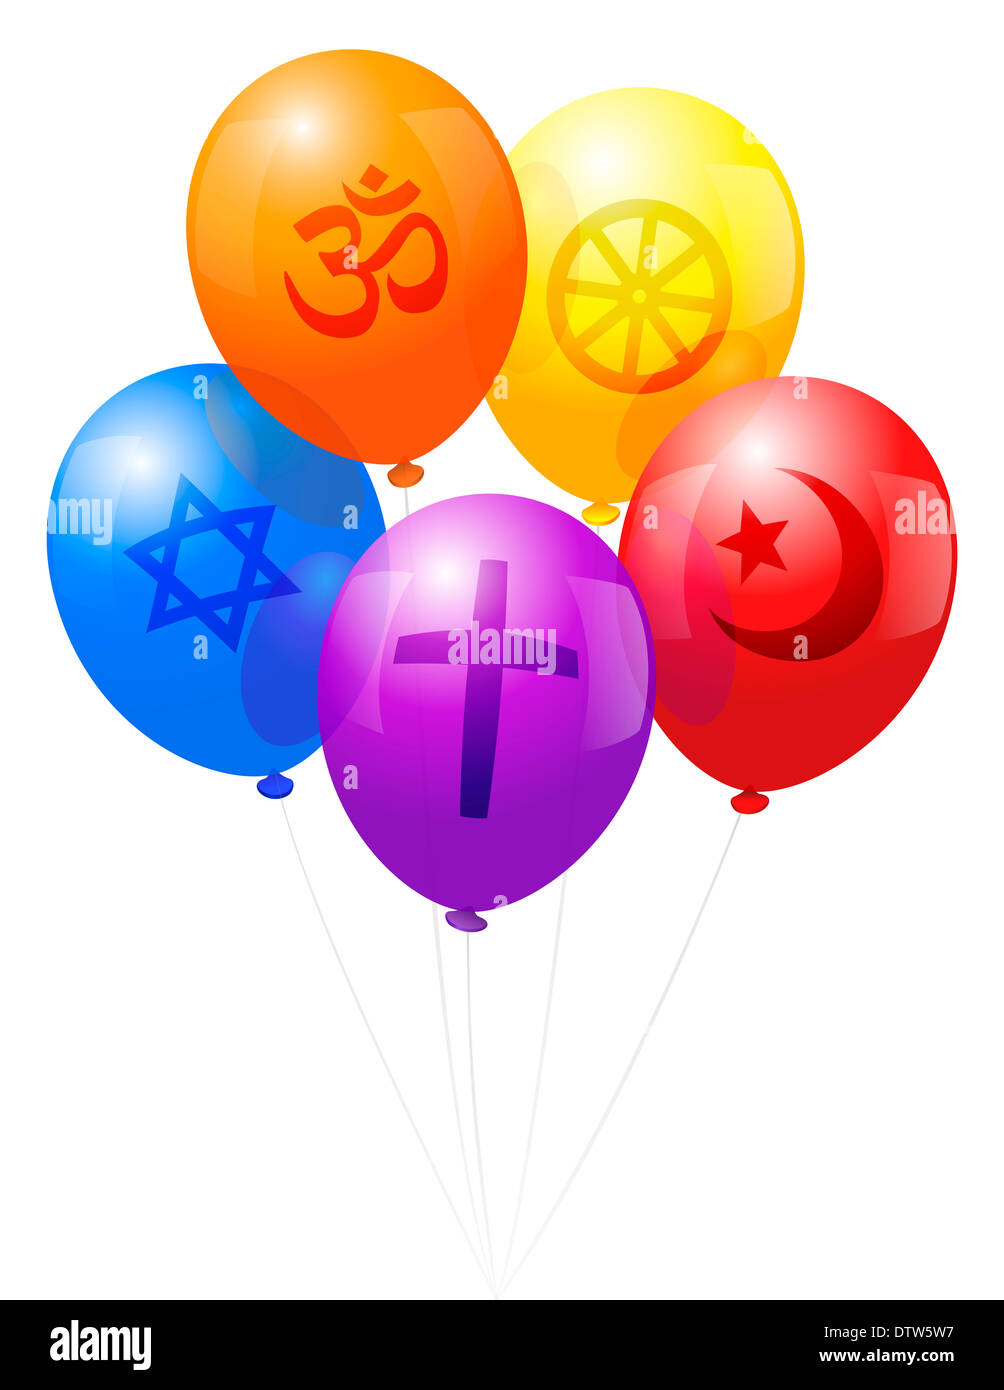 Five balloons, which are labeled with symbols of the five world religions: Christianity, Hinduism, Judaism, Islam and Buddhism. Stock Photo